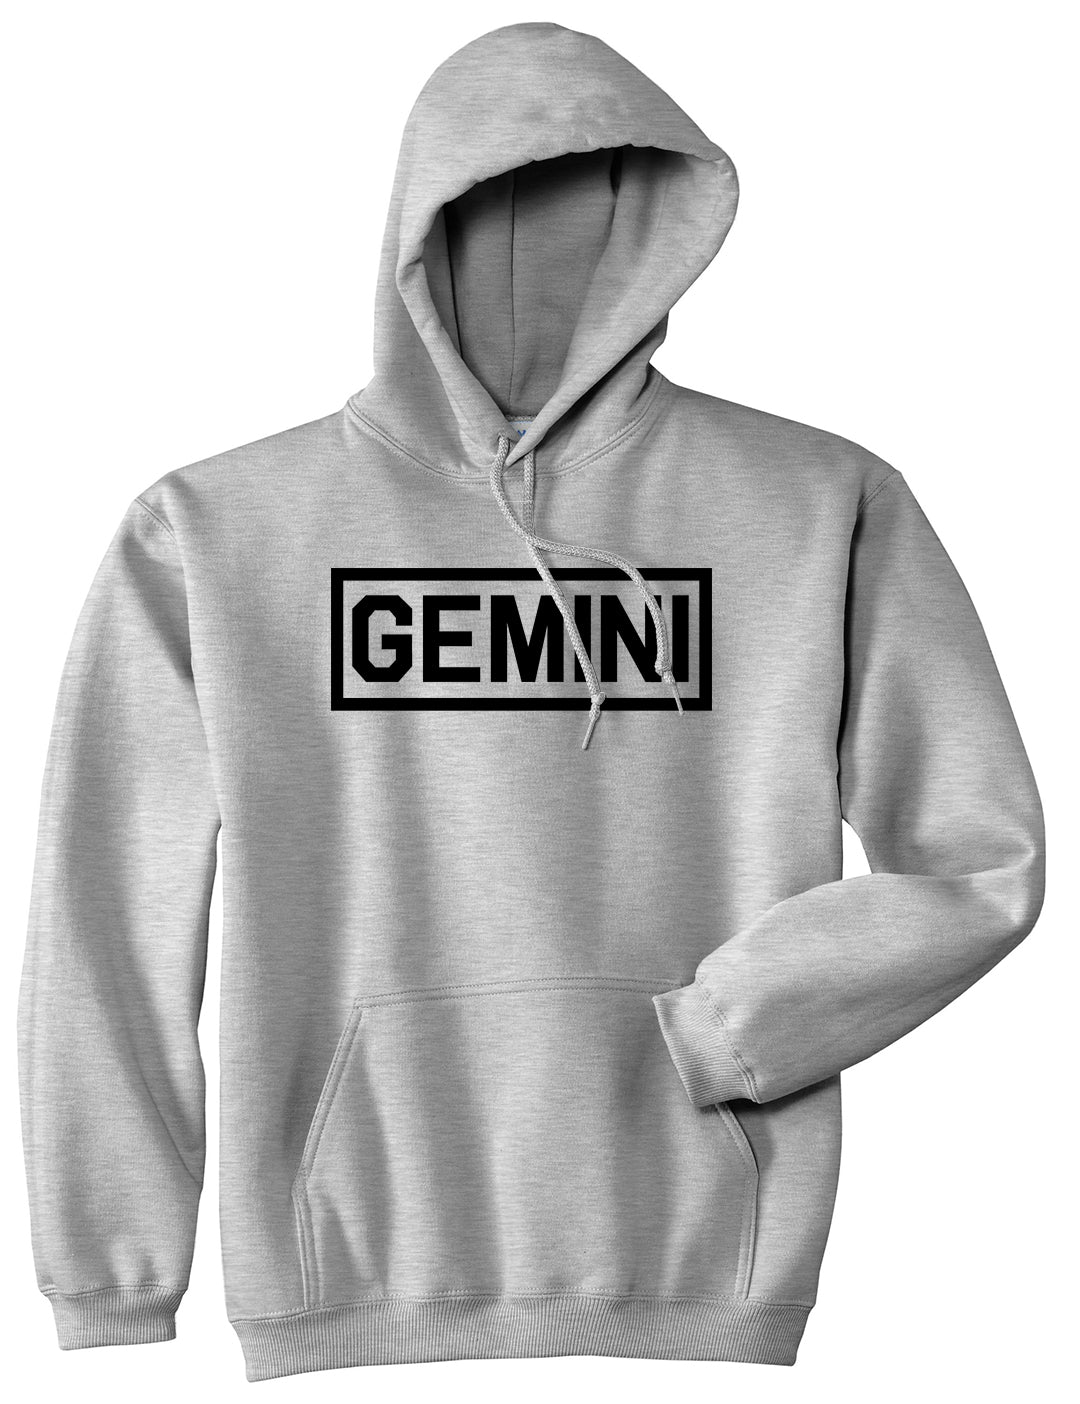 Gemini Horoscope Sign Mens Grey Pullover Hoodie by KINGS OF NY